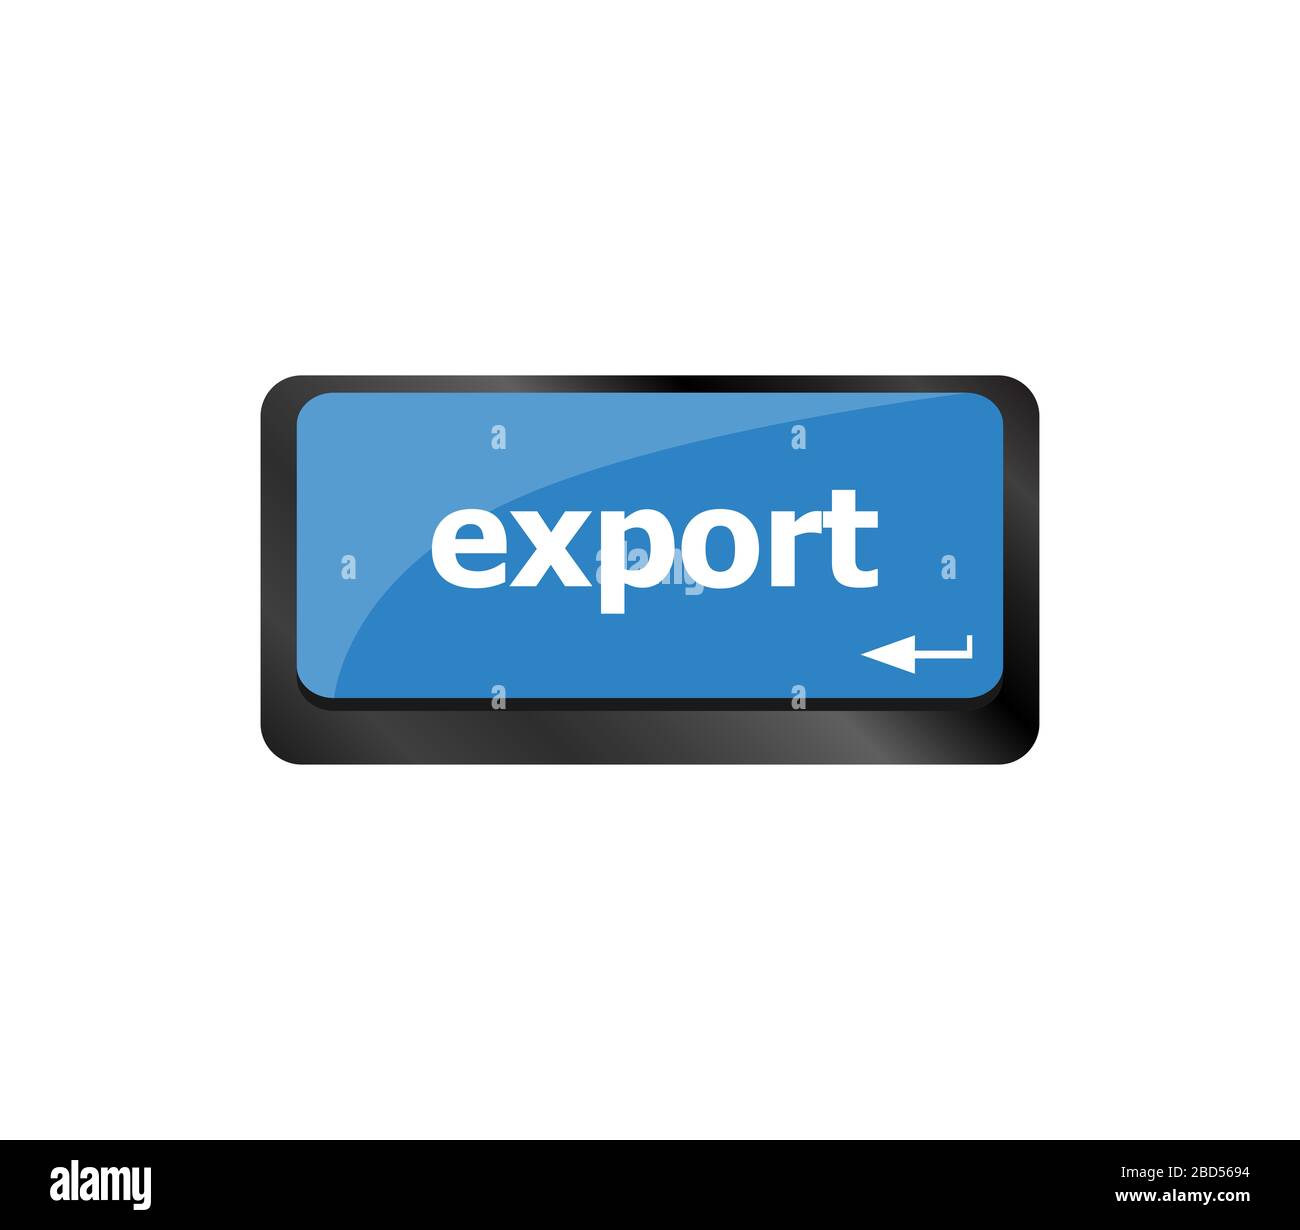 export word on computer keyboard key button Stock Photo